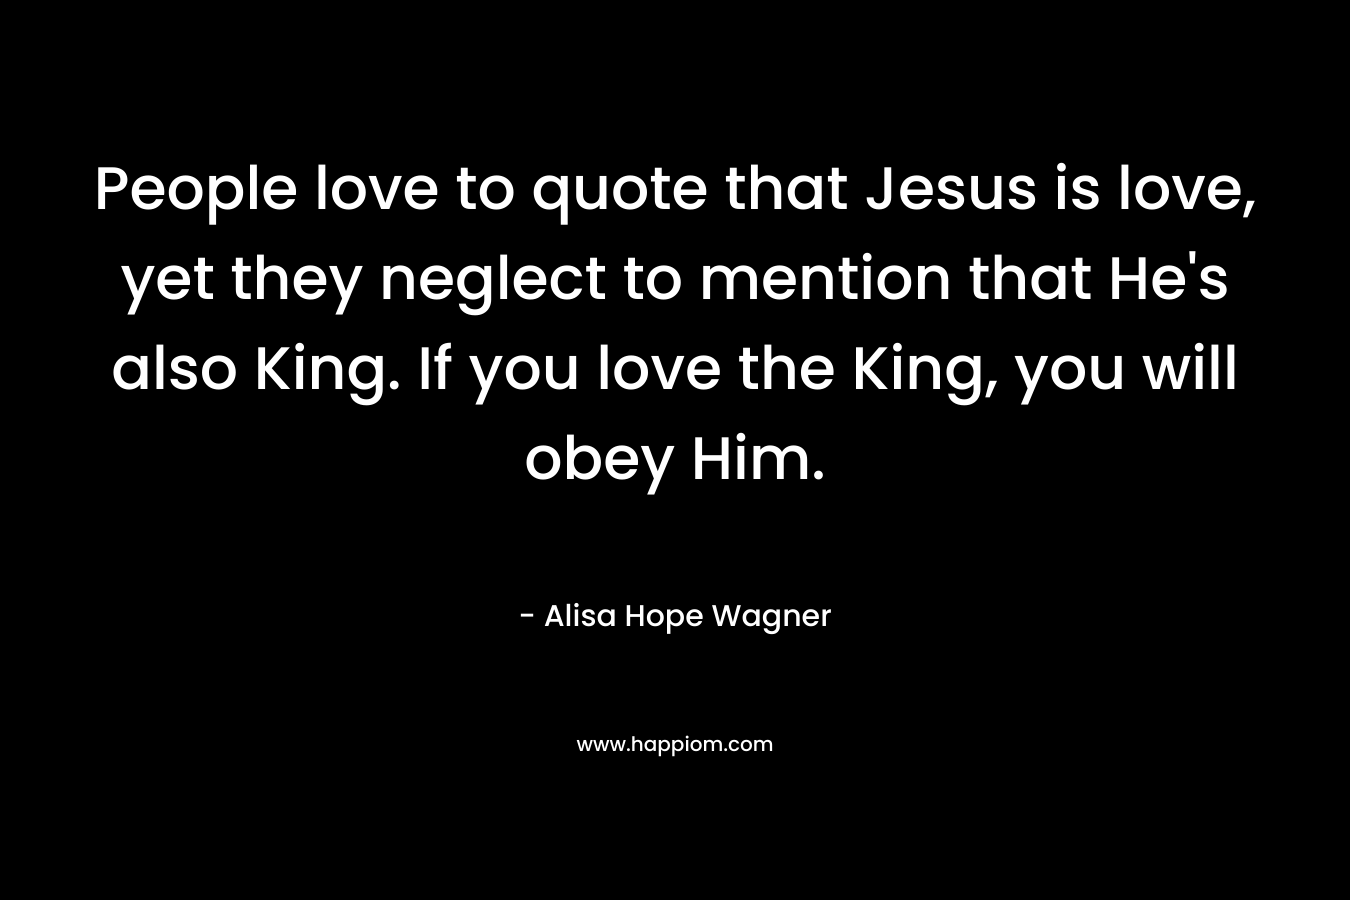 People love to quote that Jesus is love, yet they neglect to mention that He’s also King. If you love the King, you will obey Him. – Alisa Hope Wagner